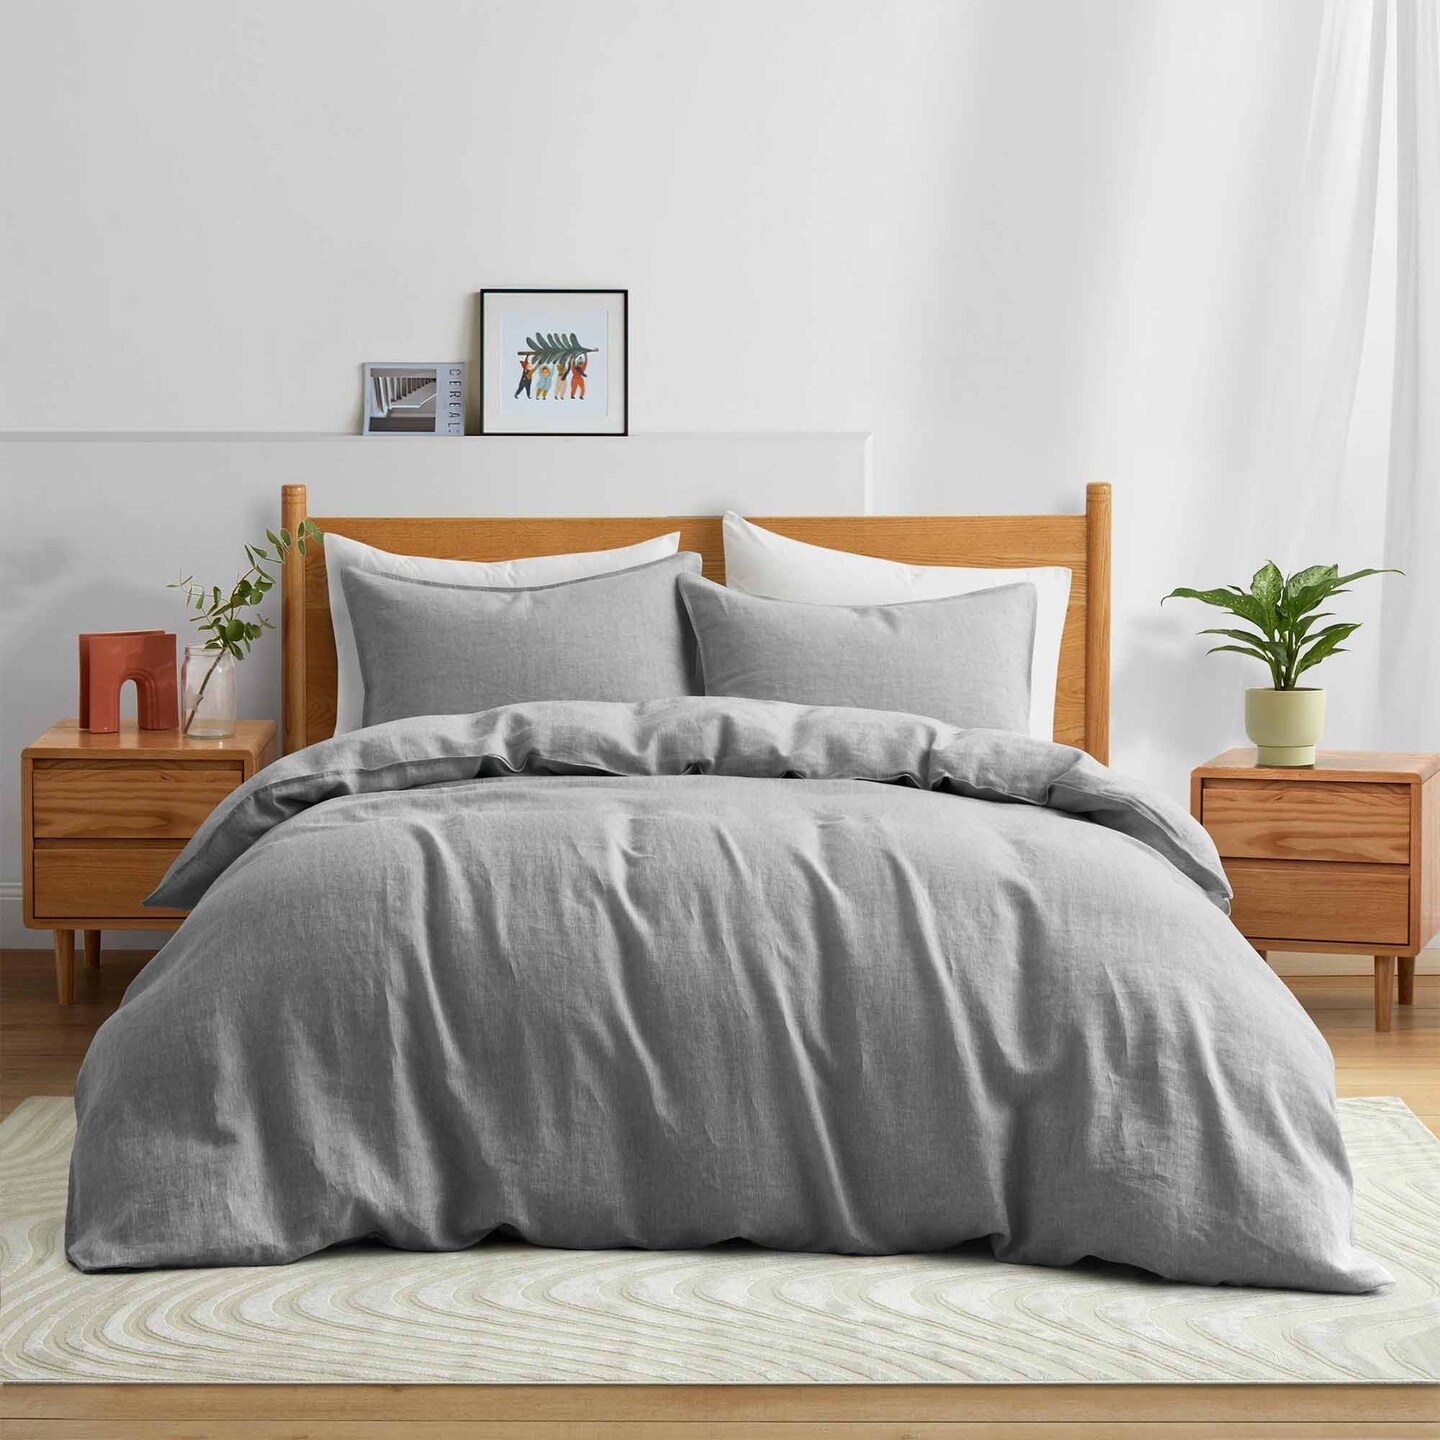 Puredown Pure Comfort and Luxury Bedding Bundle: All Season Organic Goose Down Bundle with Pillow-in-Pillow Design Goose Down